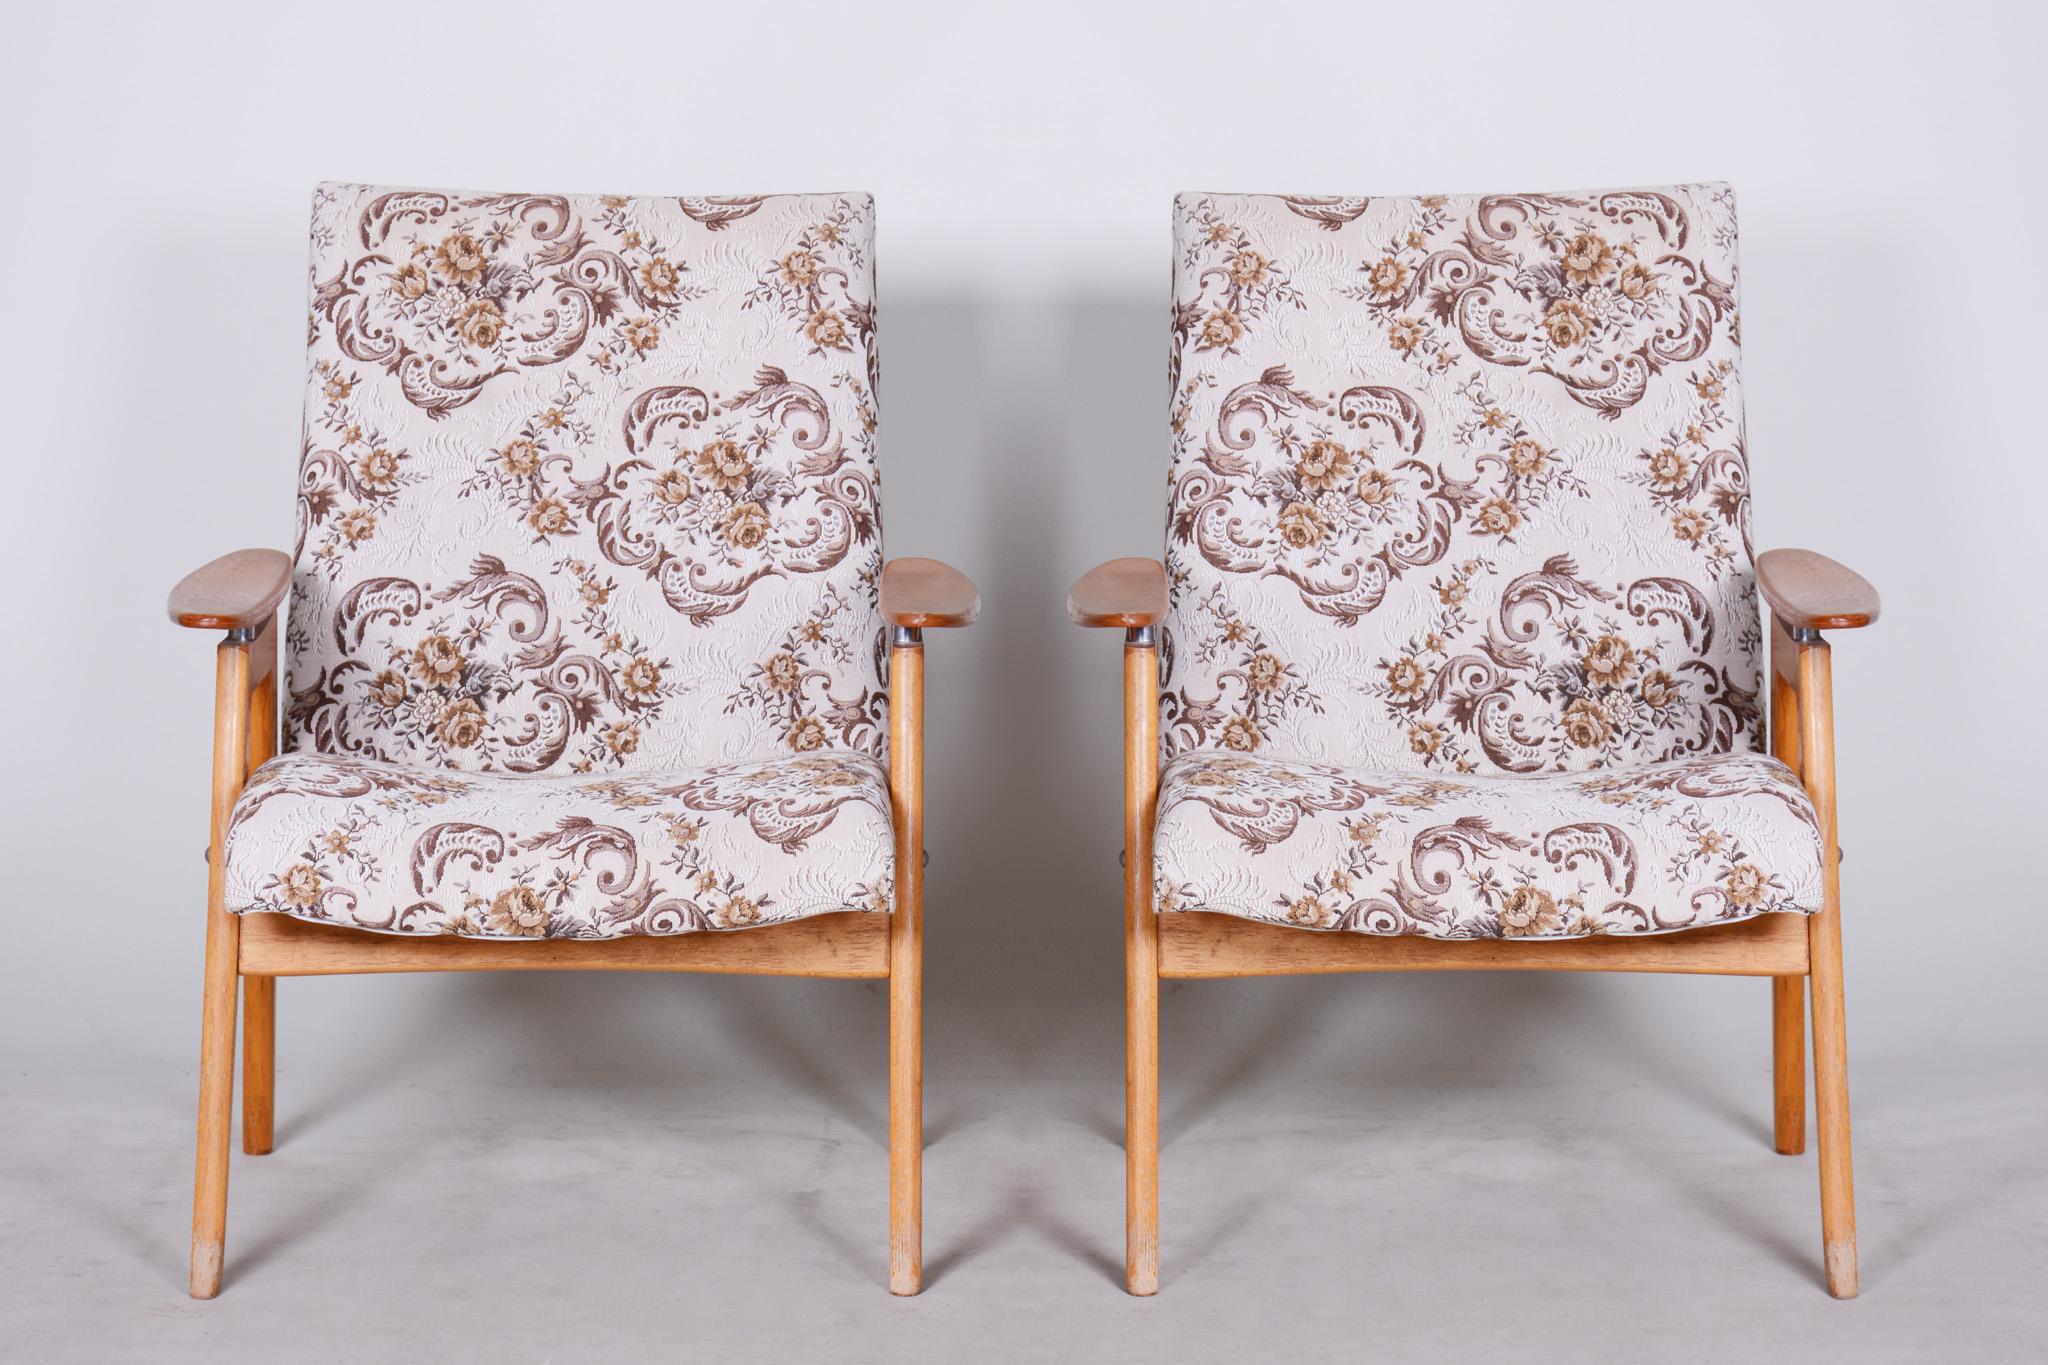 Pair of midcentury armchairs.
Original preserved condition
Source: Czechia
Material: Beech
Period: 1950-1959.